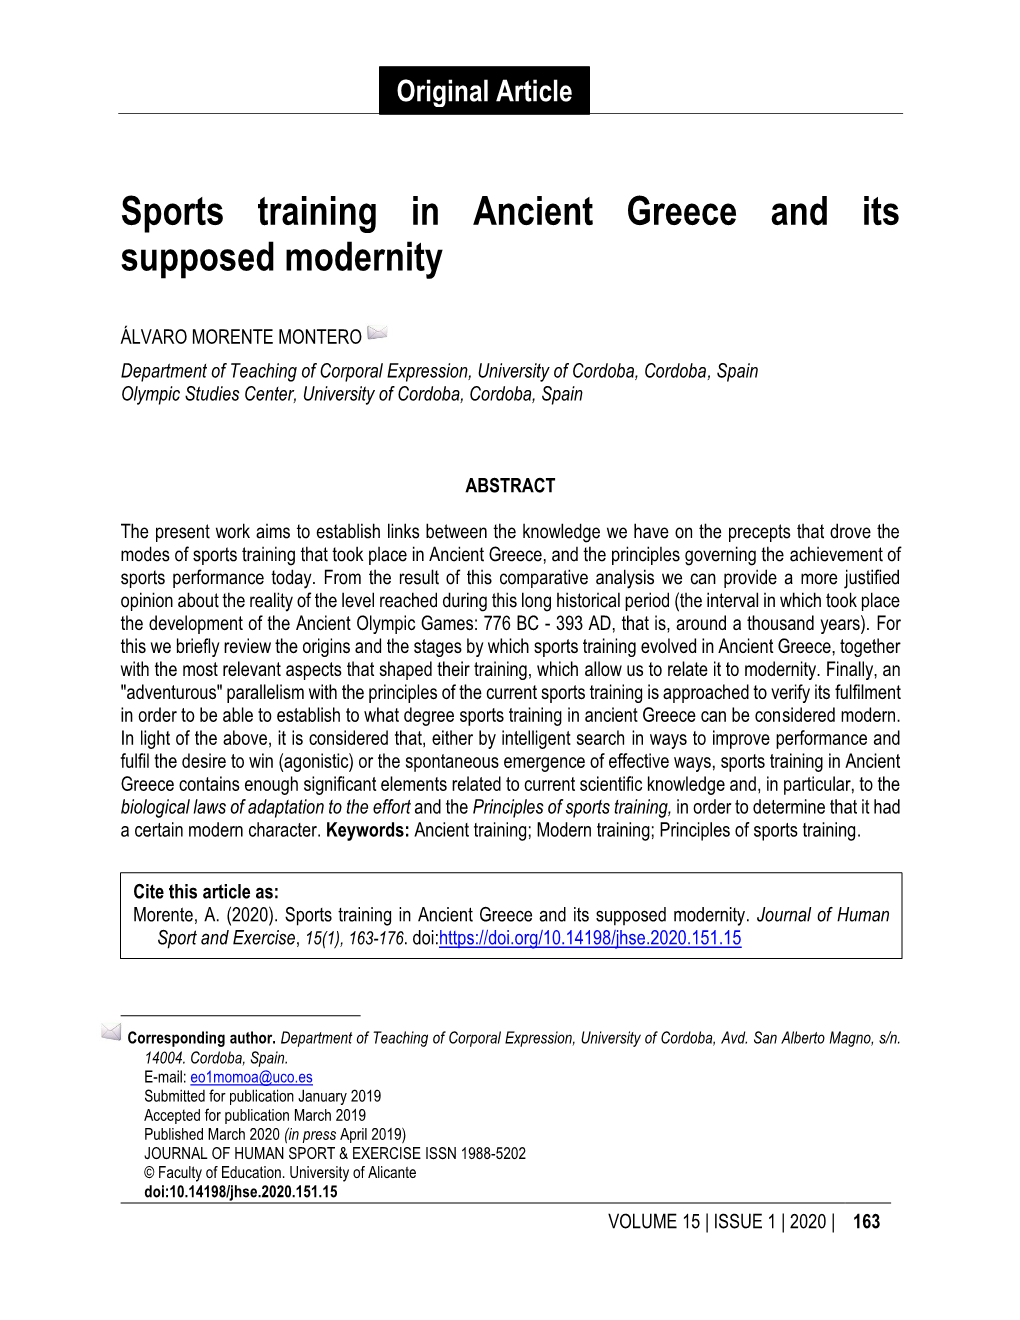 Sports Training in Ancient Greece and Its Supposed Modernity